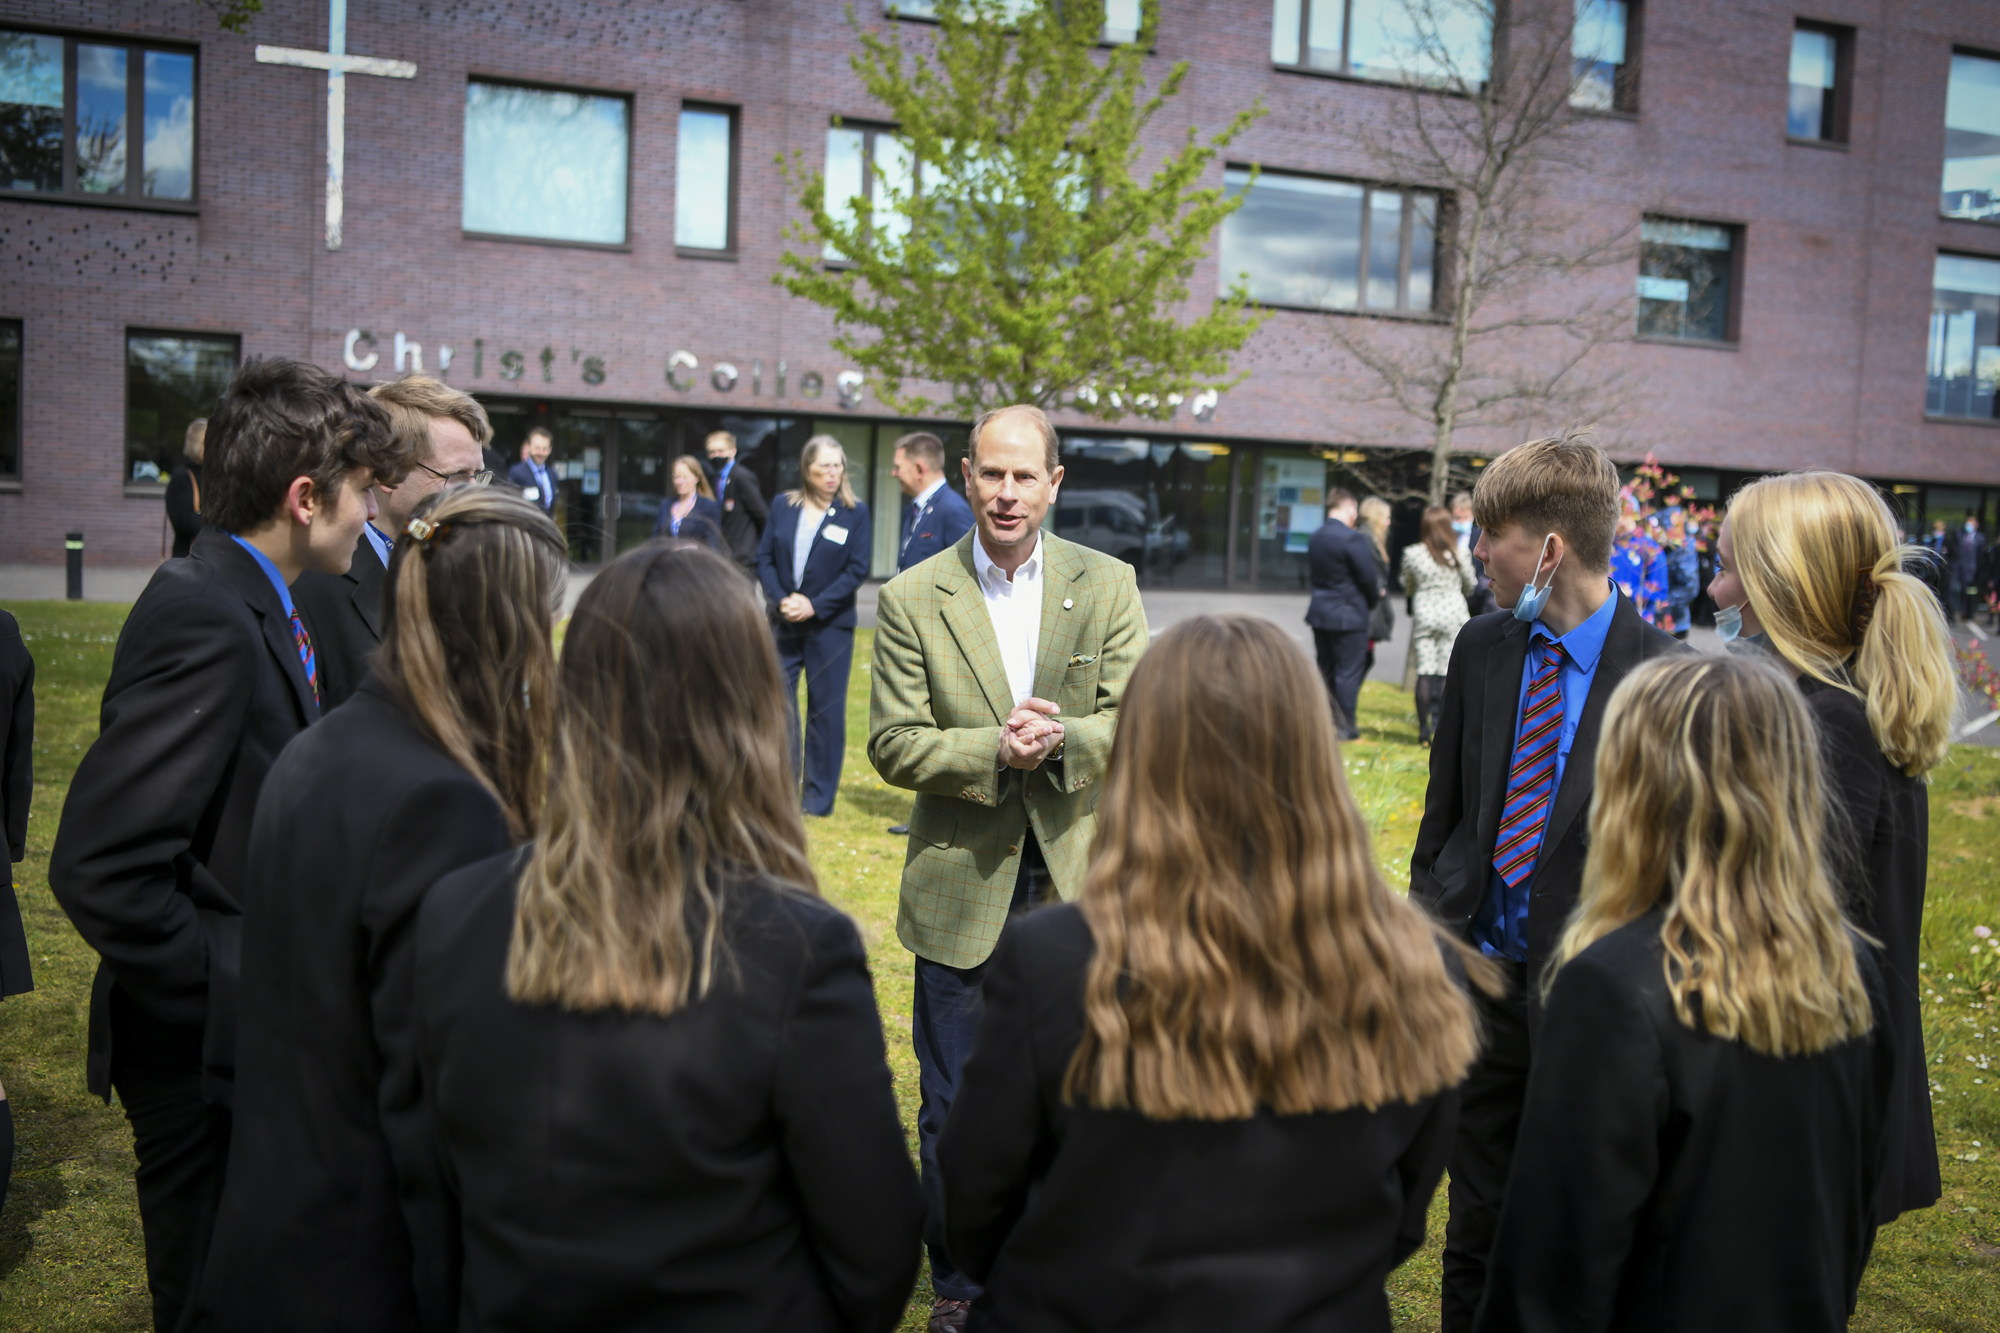 The Earl of Wessex at Christchurch School, Guildford